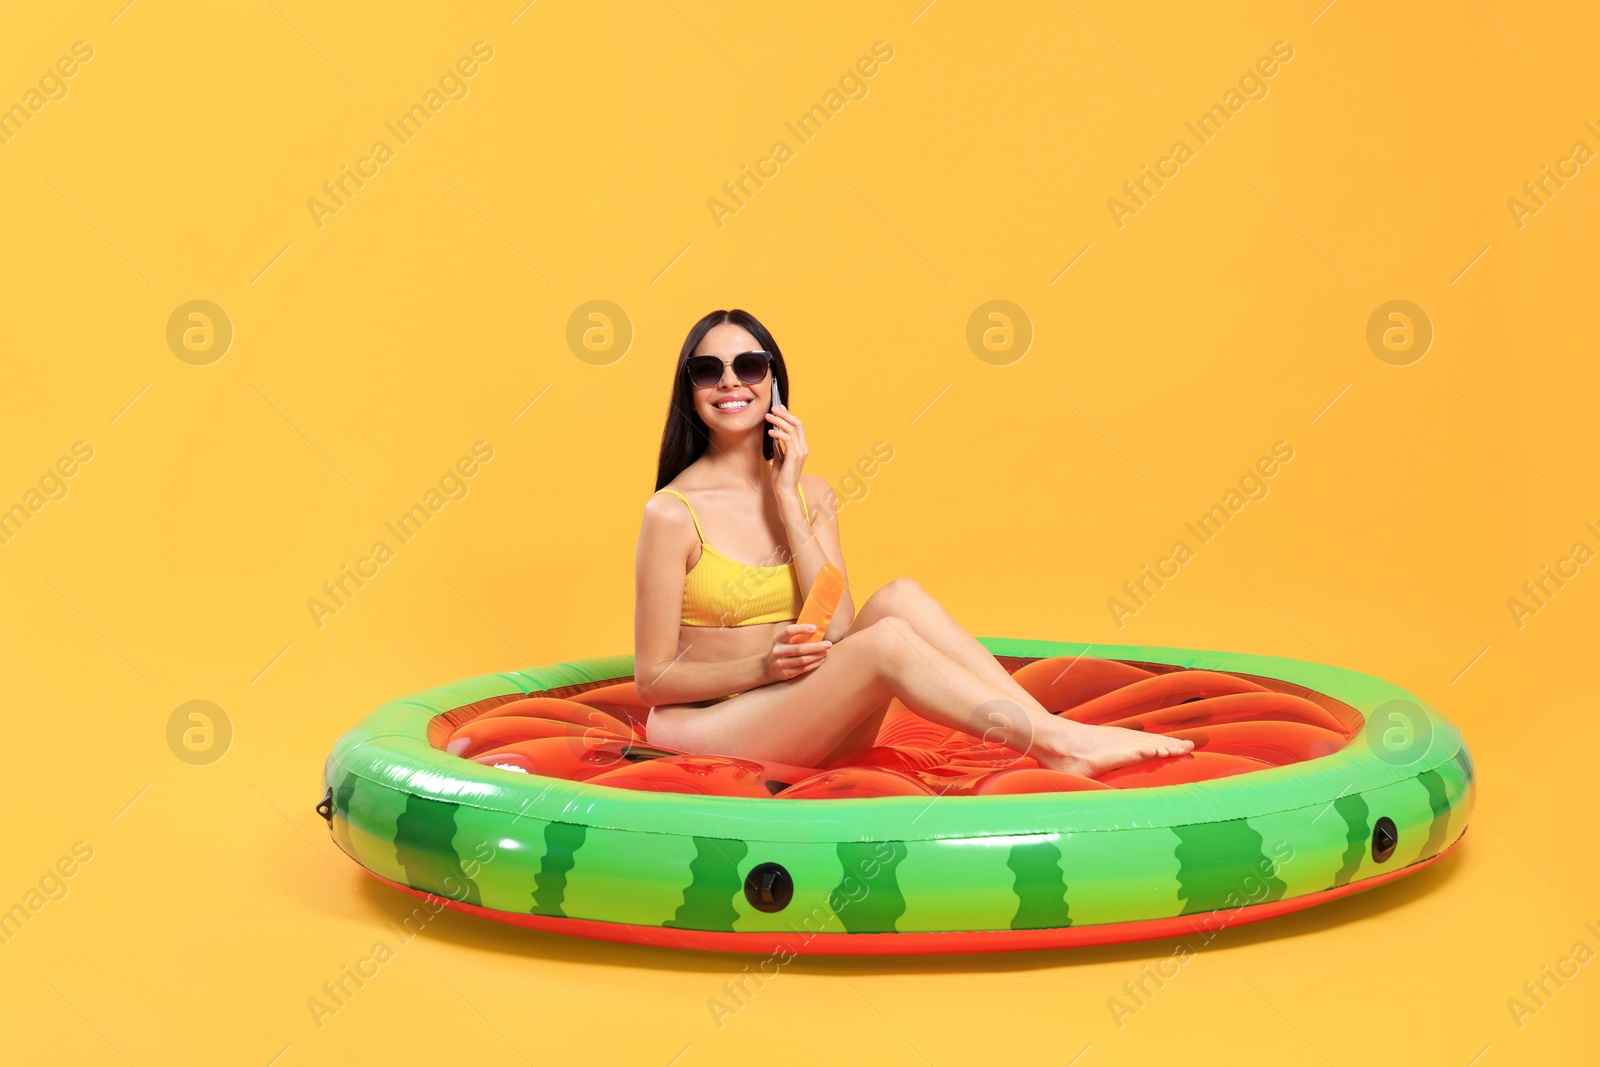 Photo of Happy young woman with beautiful suntan and sunglasses on inflatable mattress against orange background